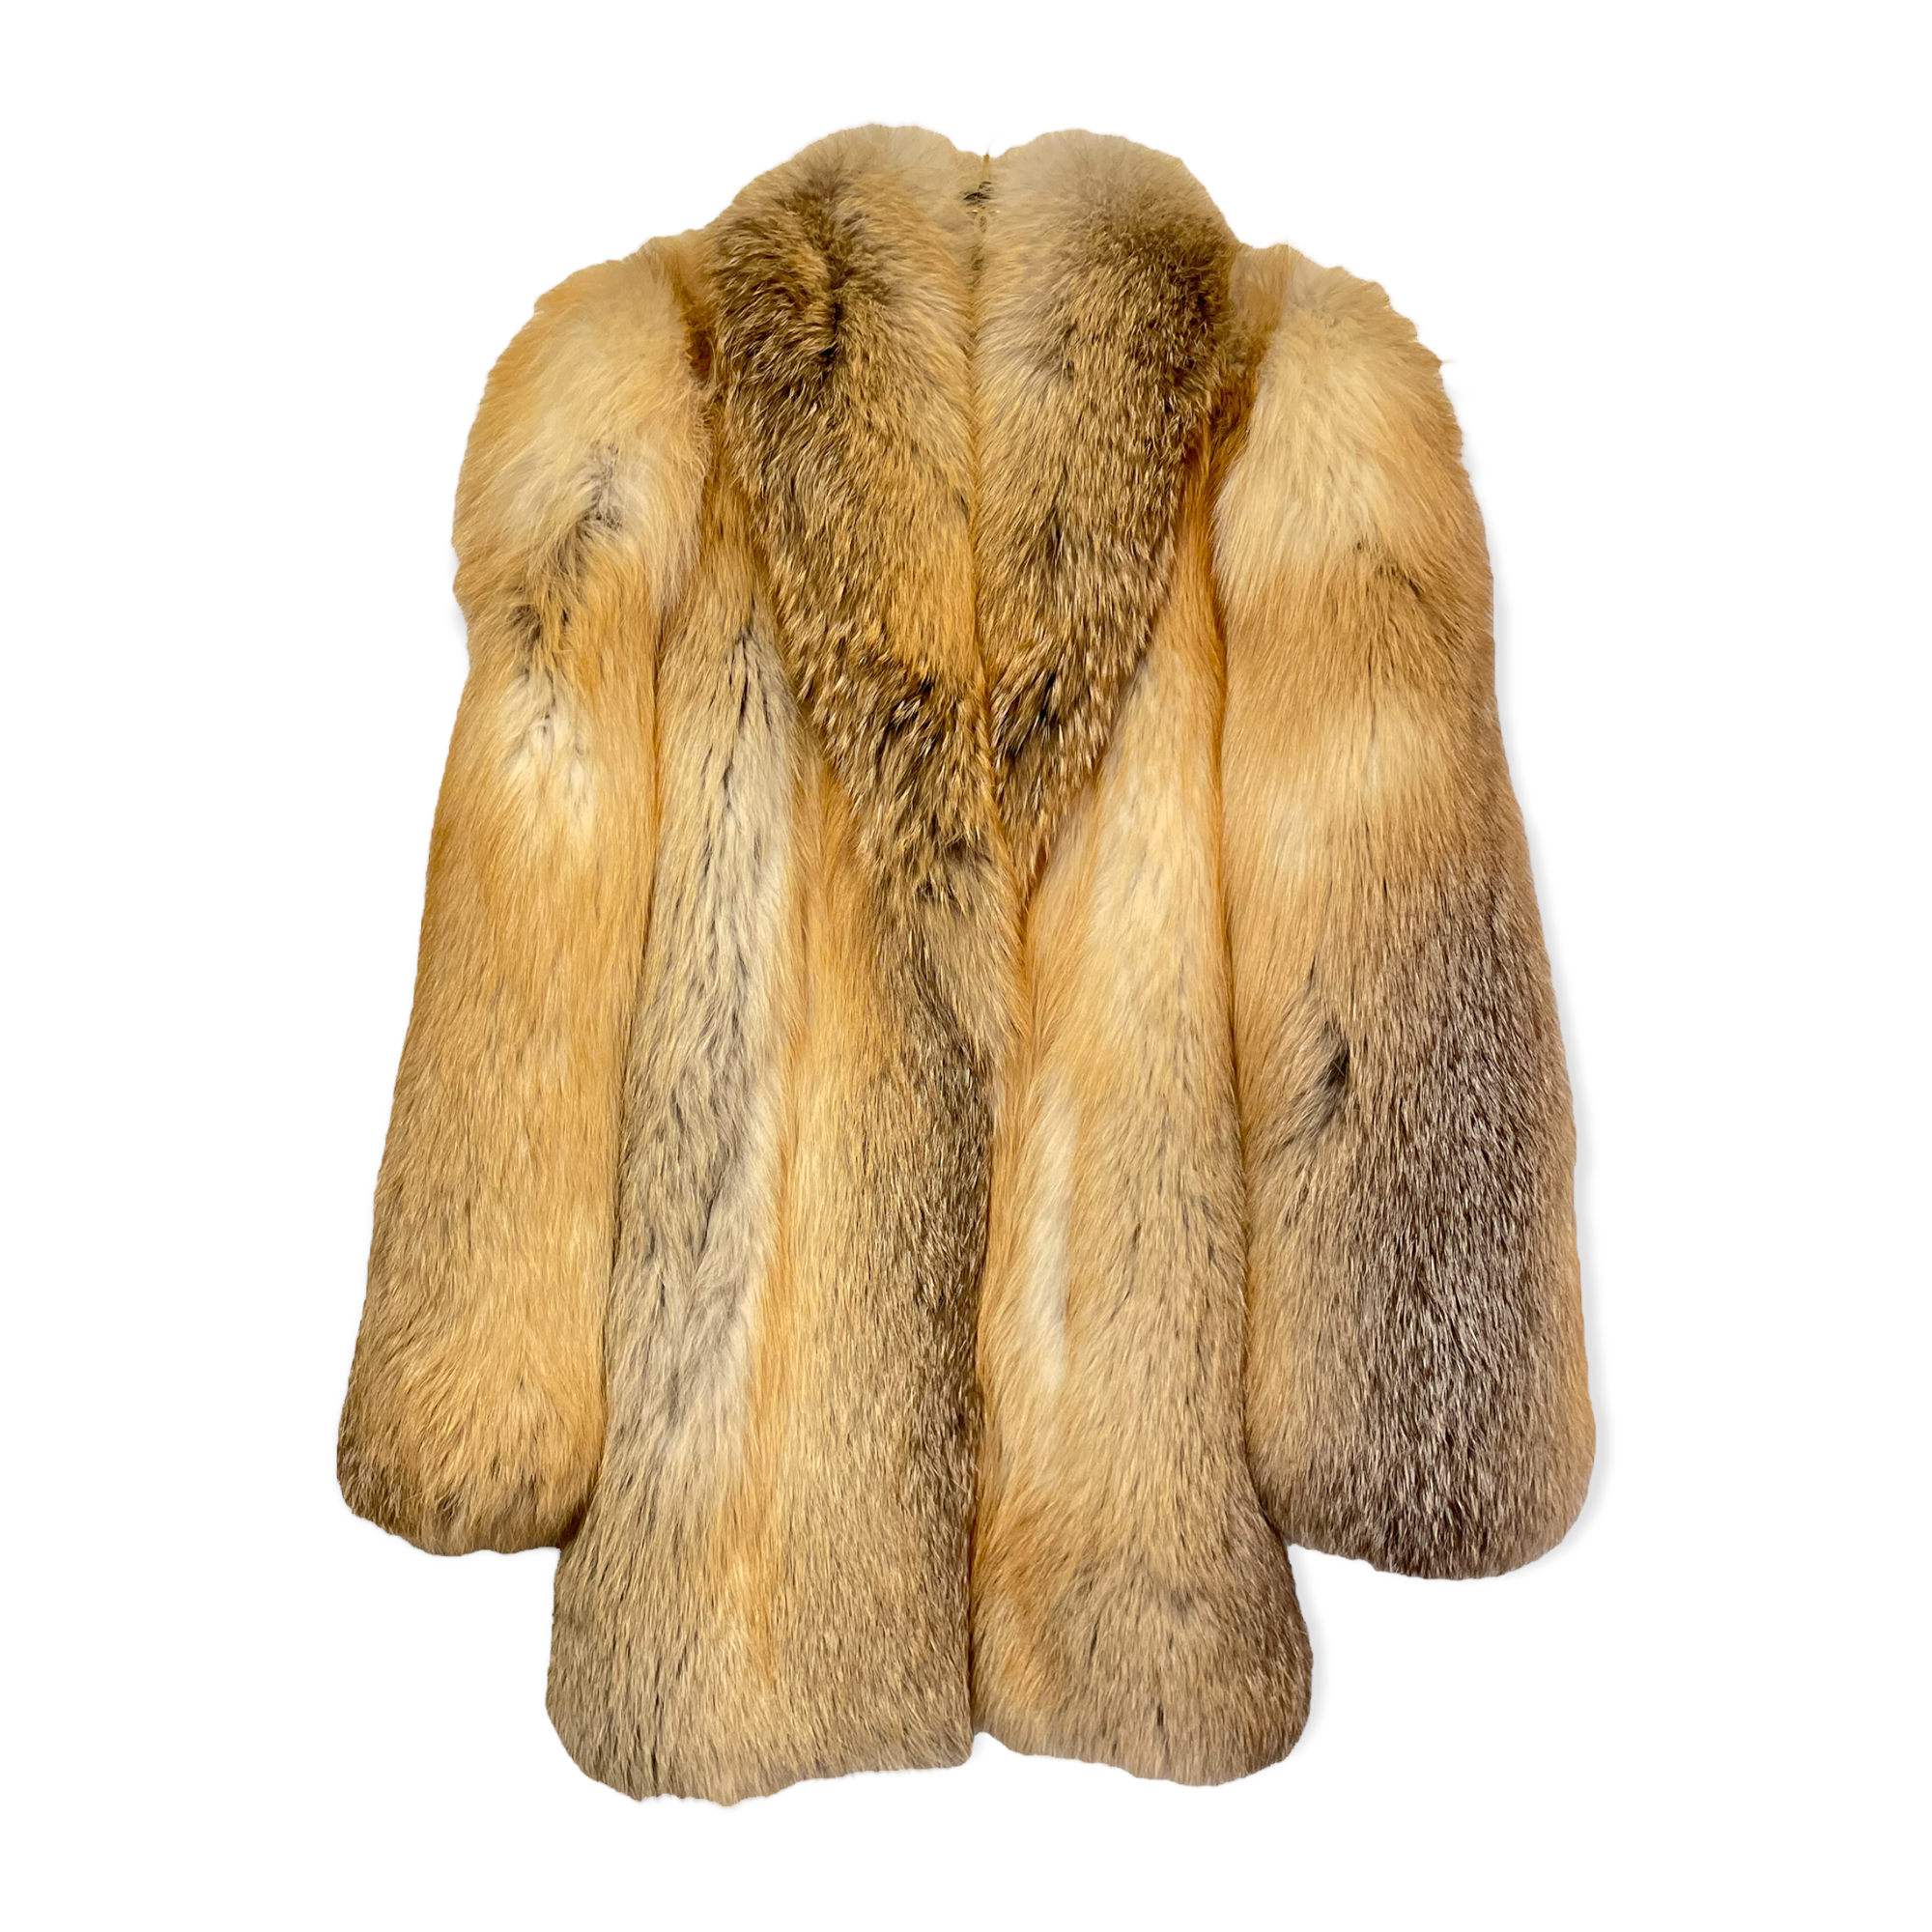 Red Fox Fur Vintage Coat Custom Made by Furs by Guarino